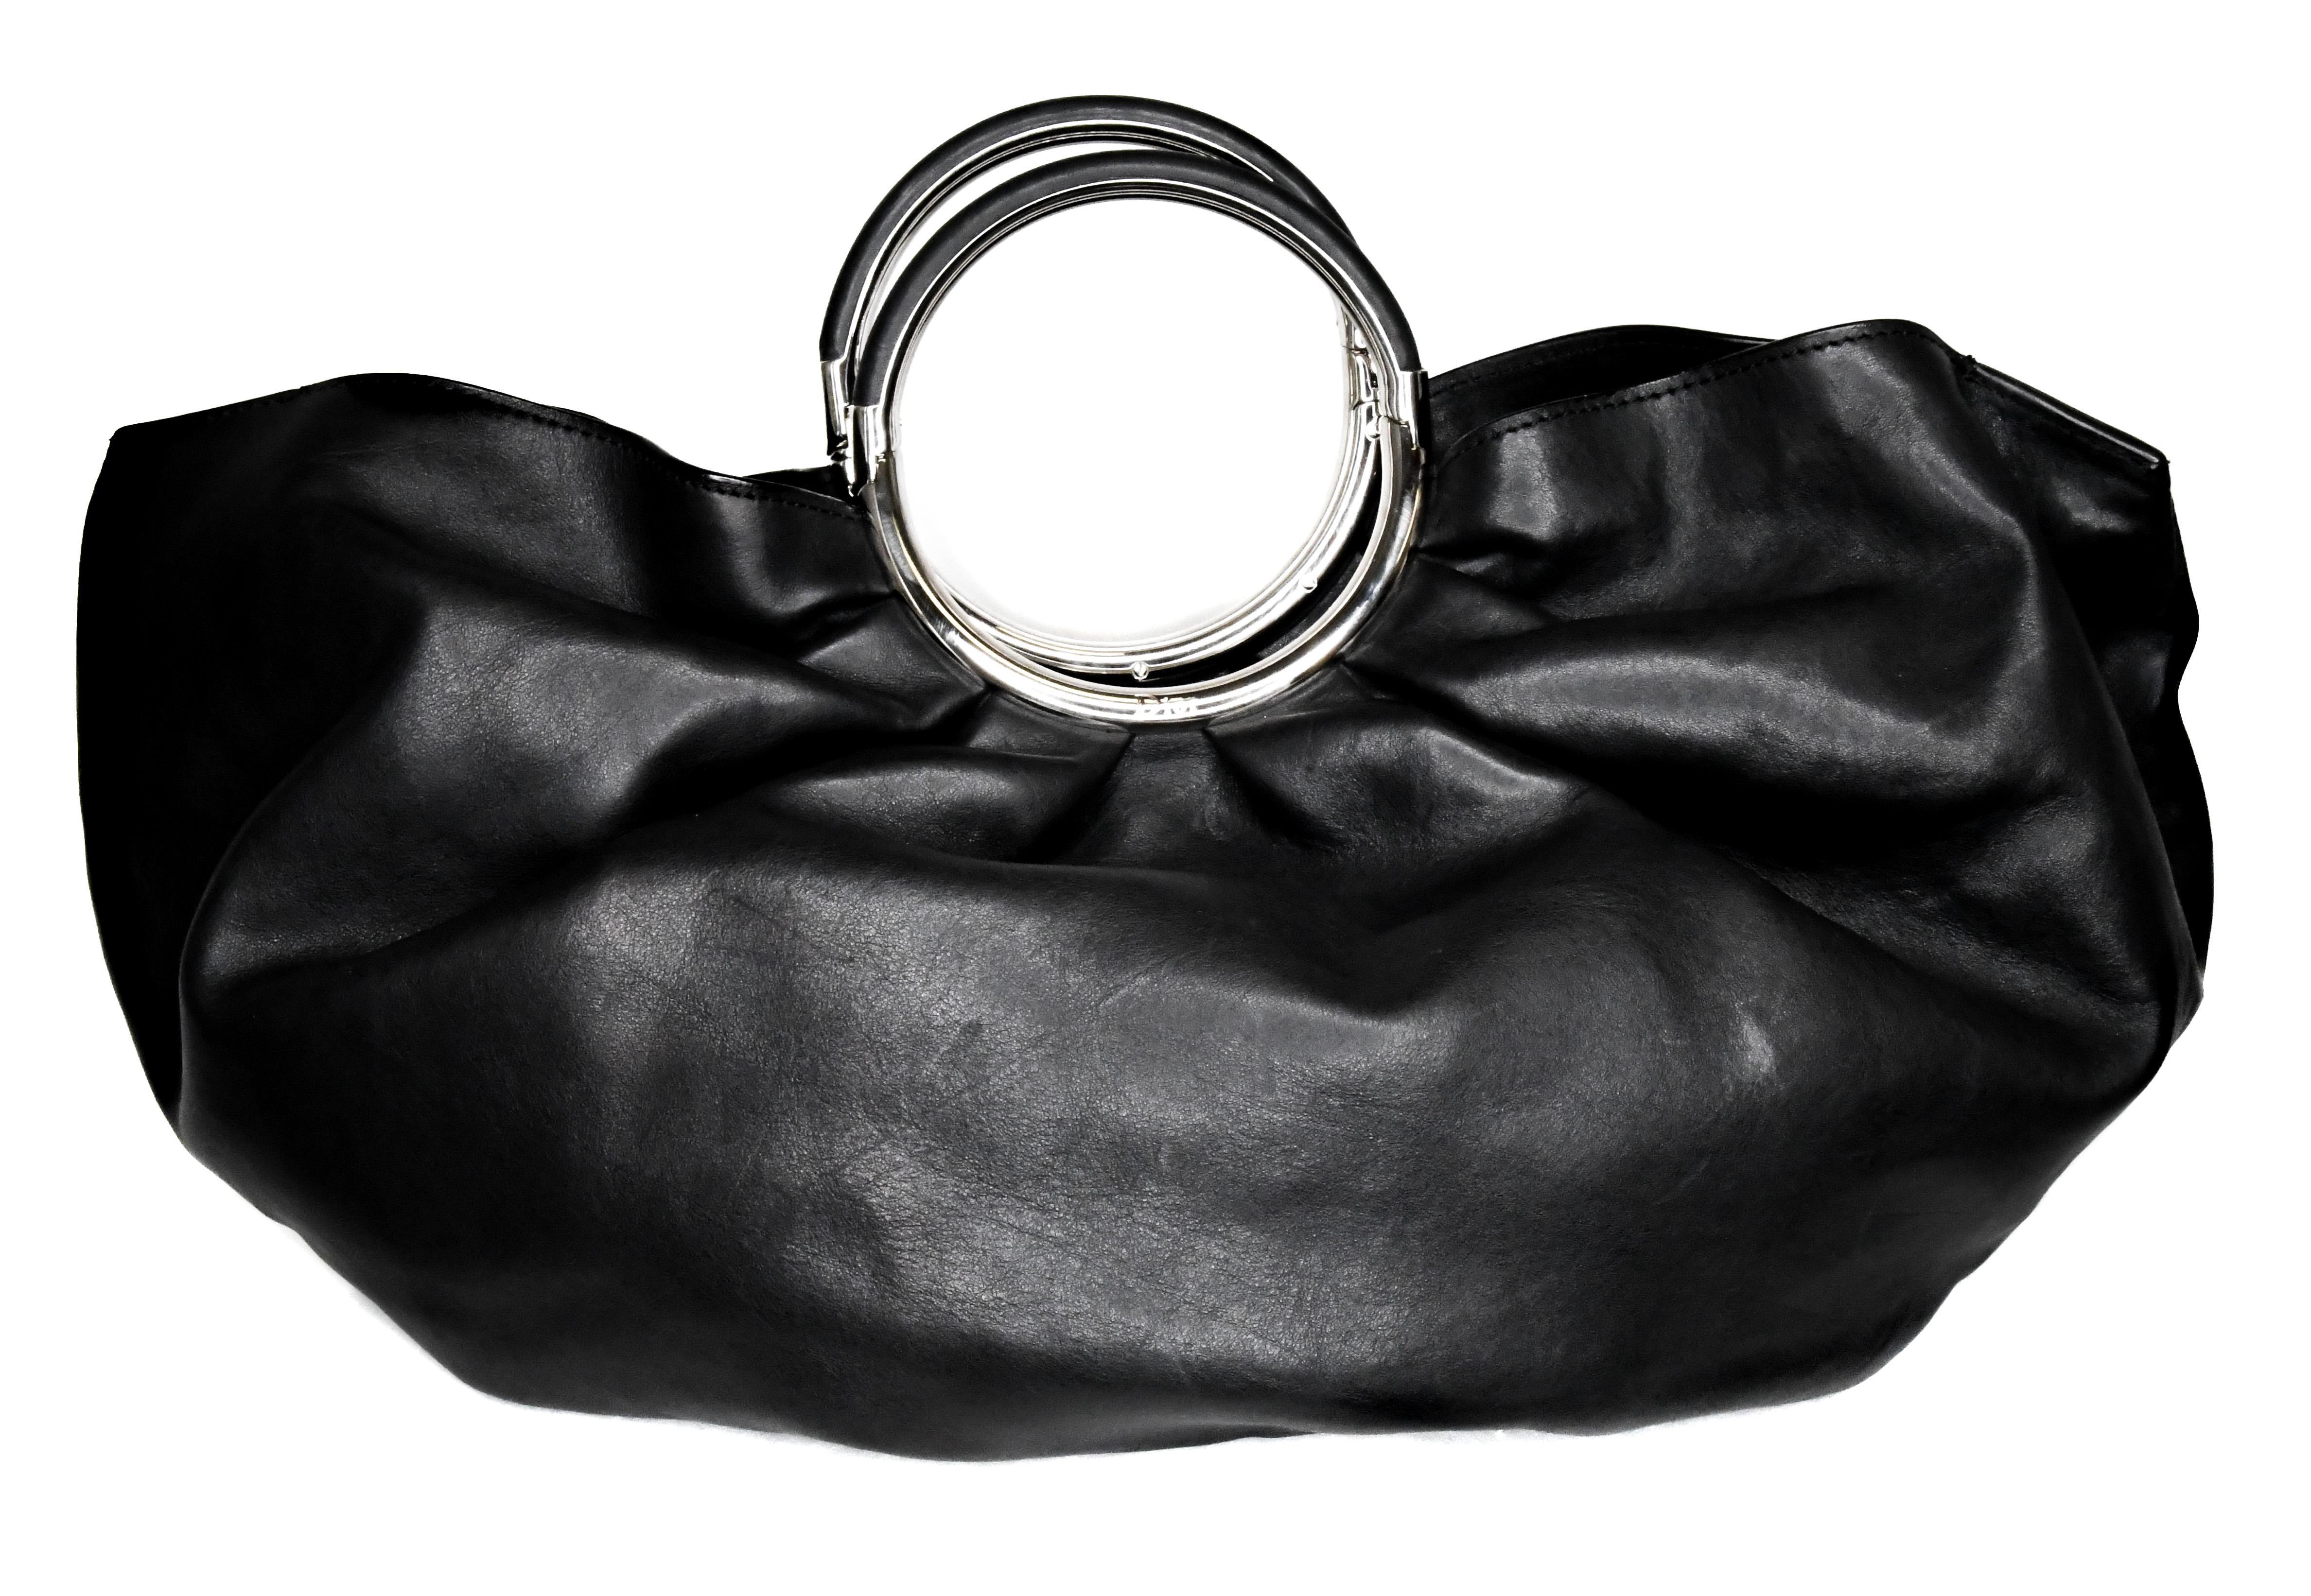 Christian Dior Babe Bag in black is a must for any collector of Dior designed by John Galliano.  Features ultra-luxurious black leather, gathered silhouette, and silver tone metal and leather round handles.  Handles are hinged for comfortable